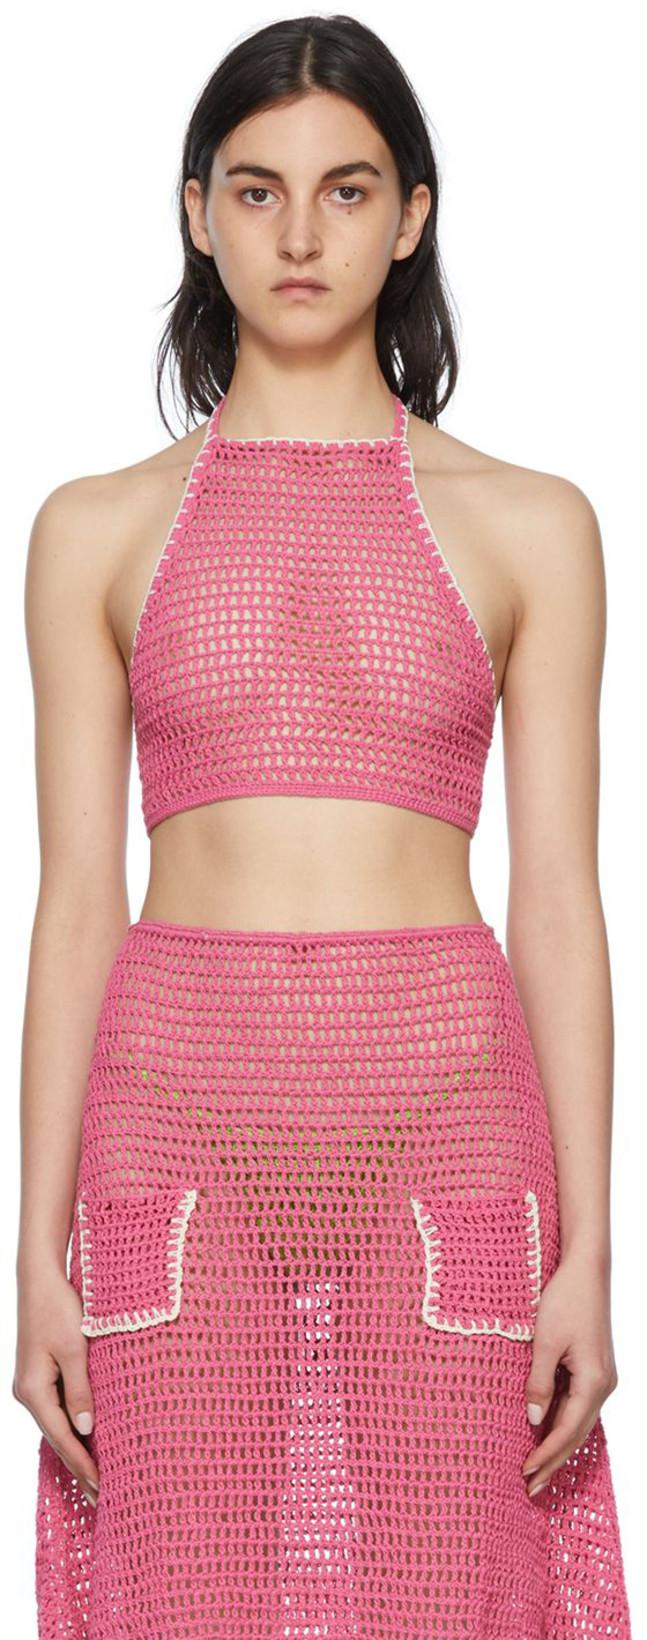 SSENSE Exclusive Pink Camisole by AKOIA SWIM